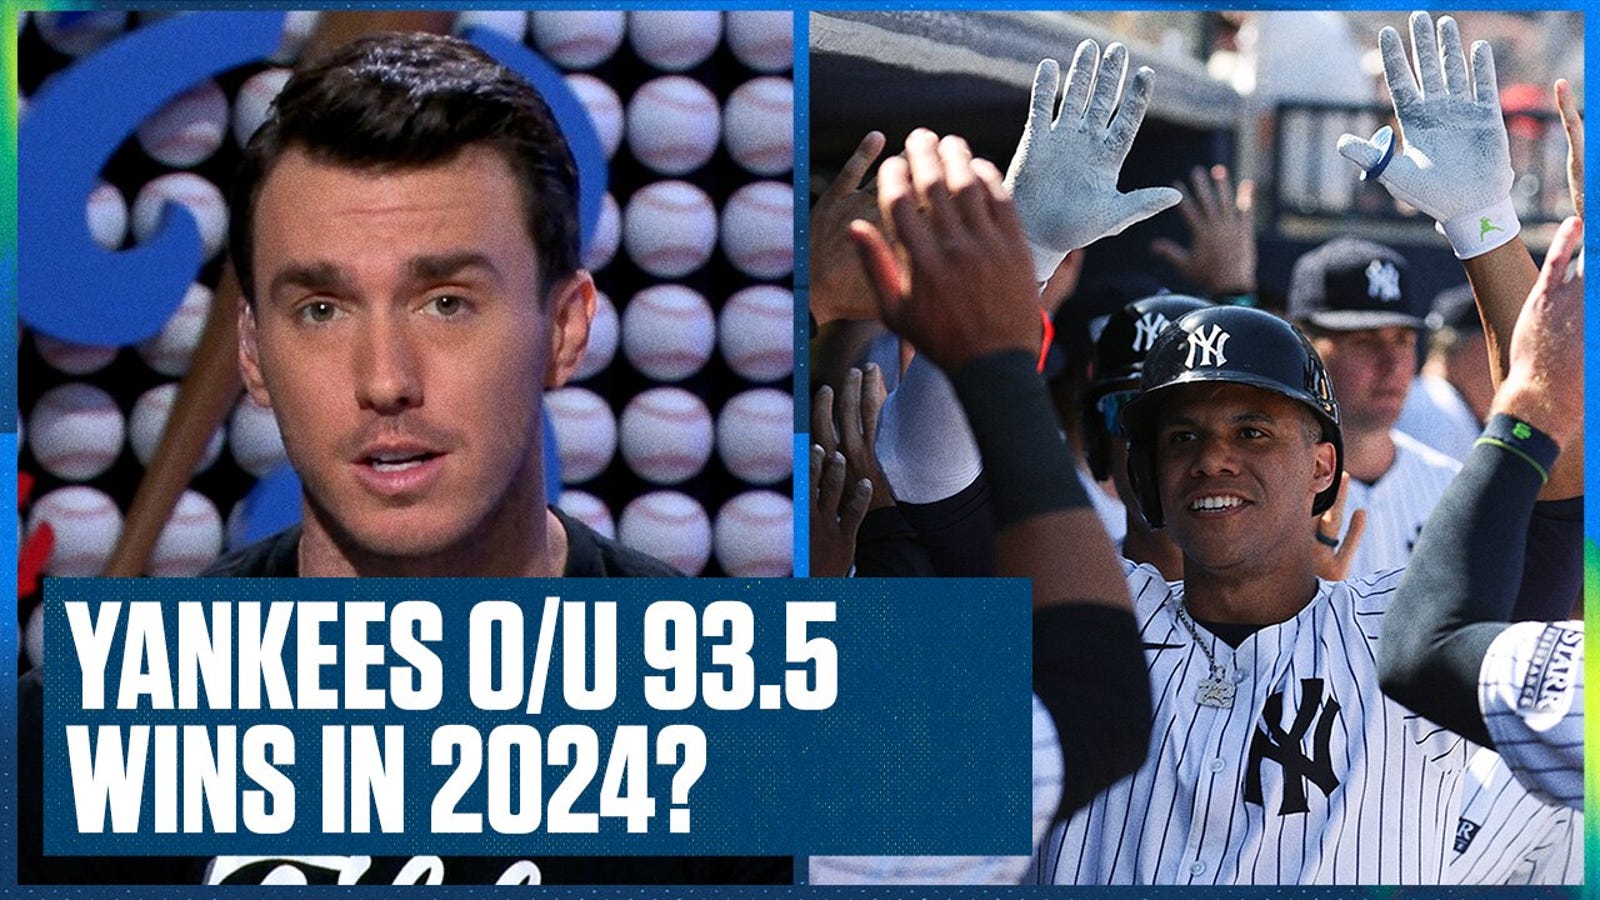 Will the Yankees go over 93.5 wins in 2024?